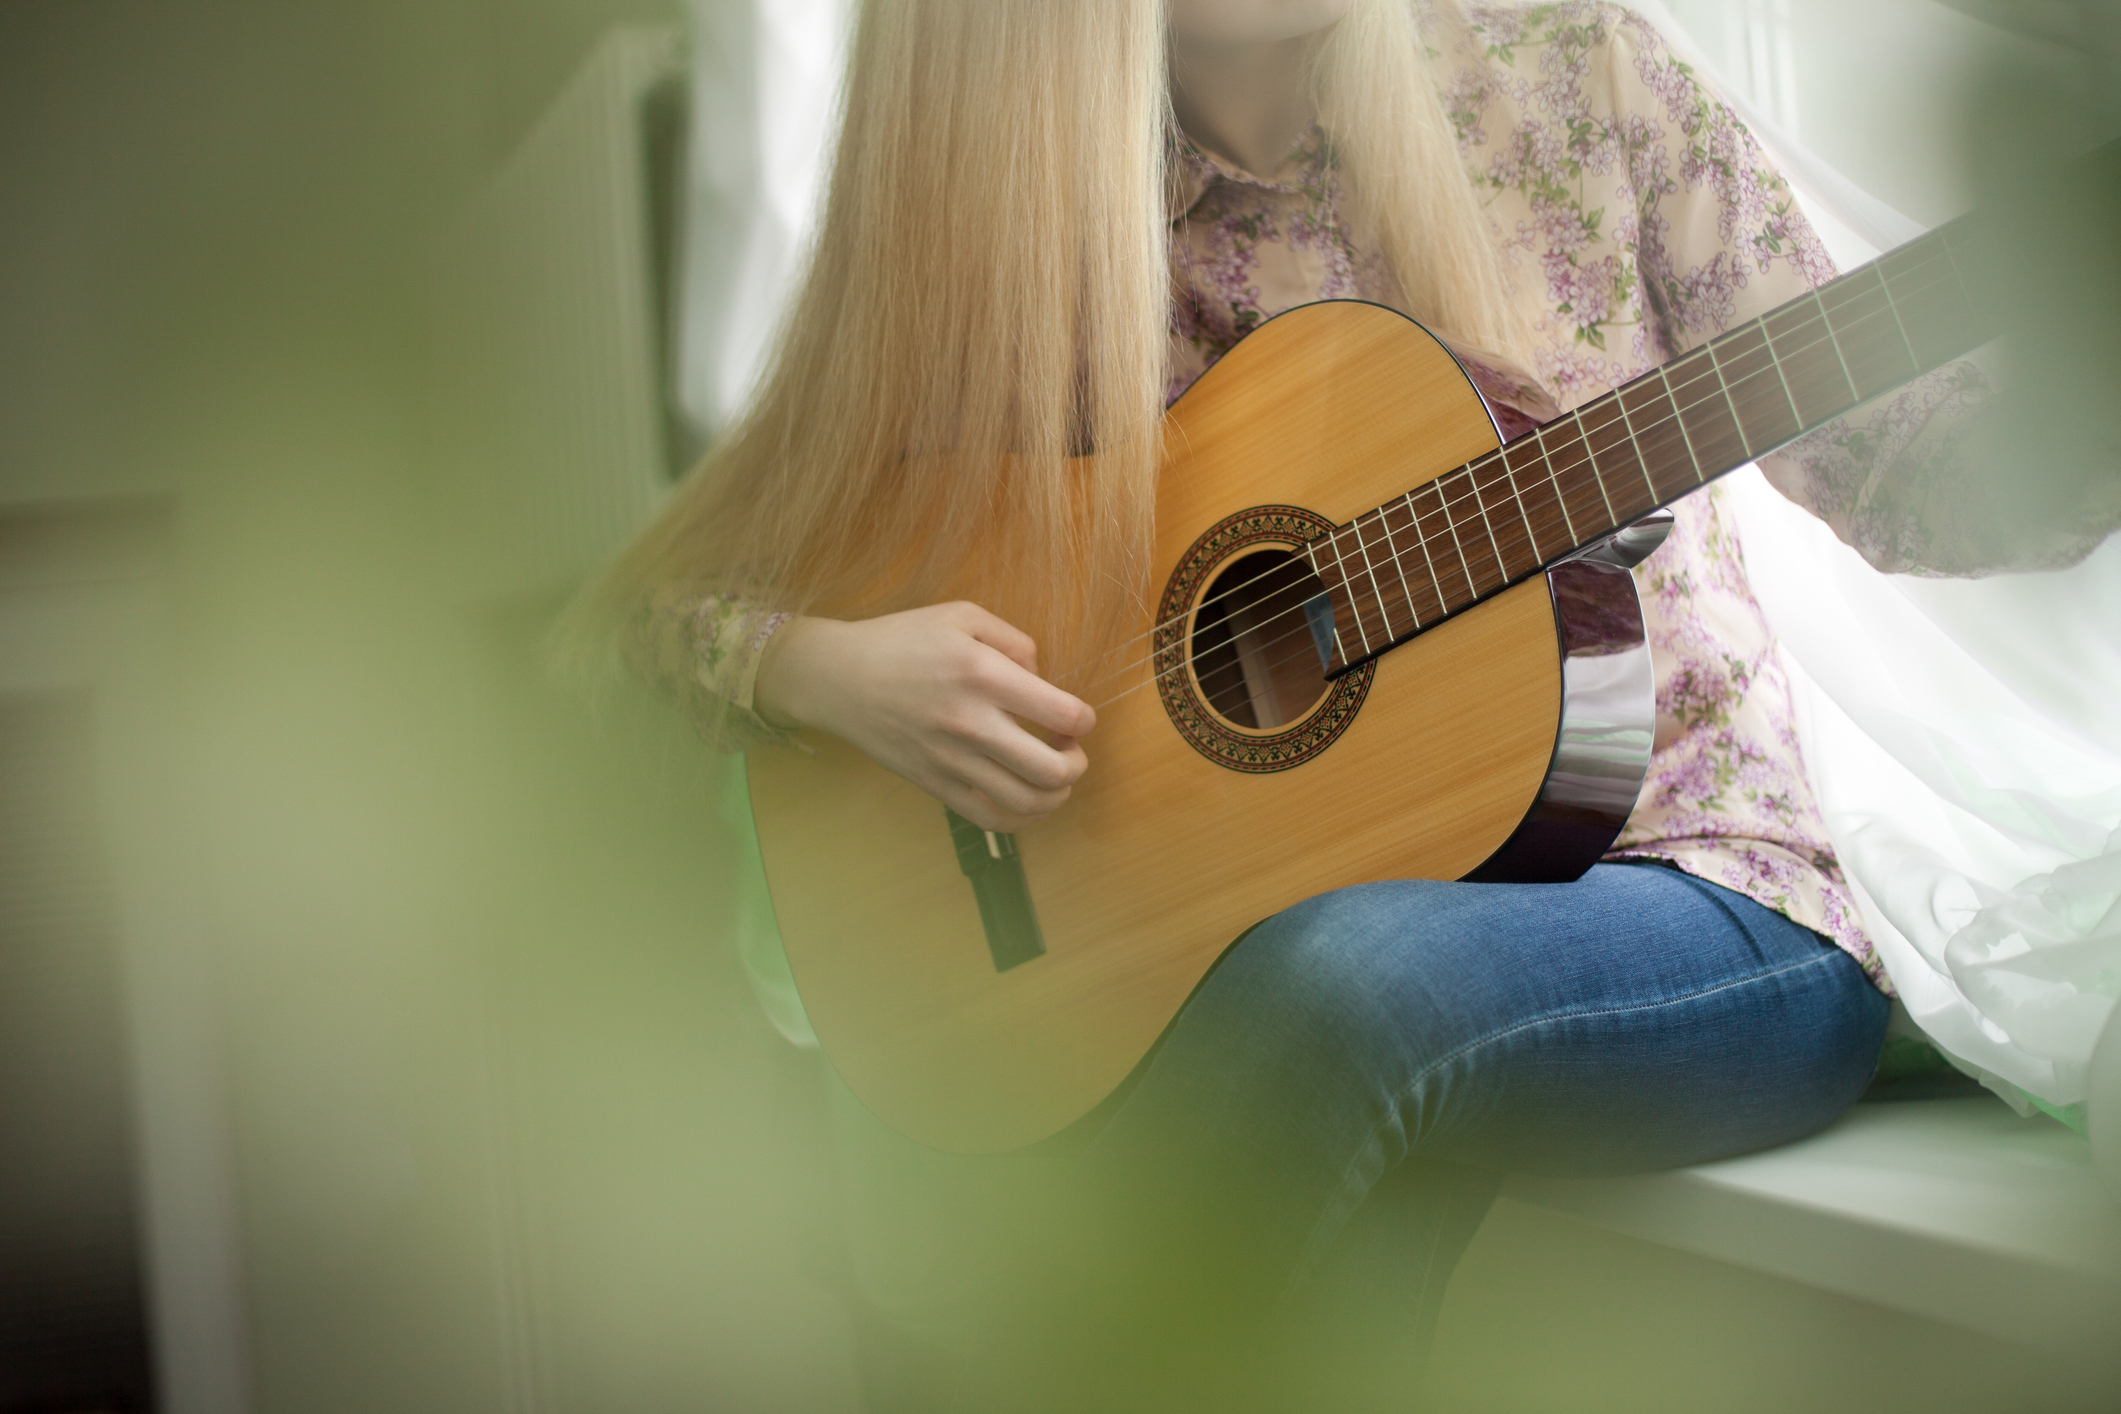 Stock image of woman playing guitar, face cropped out